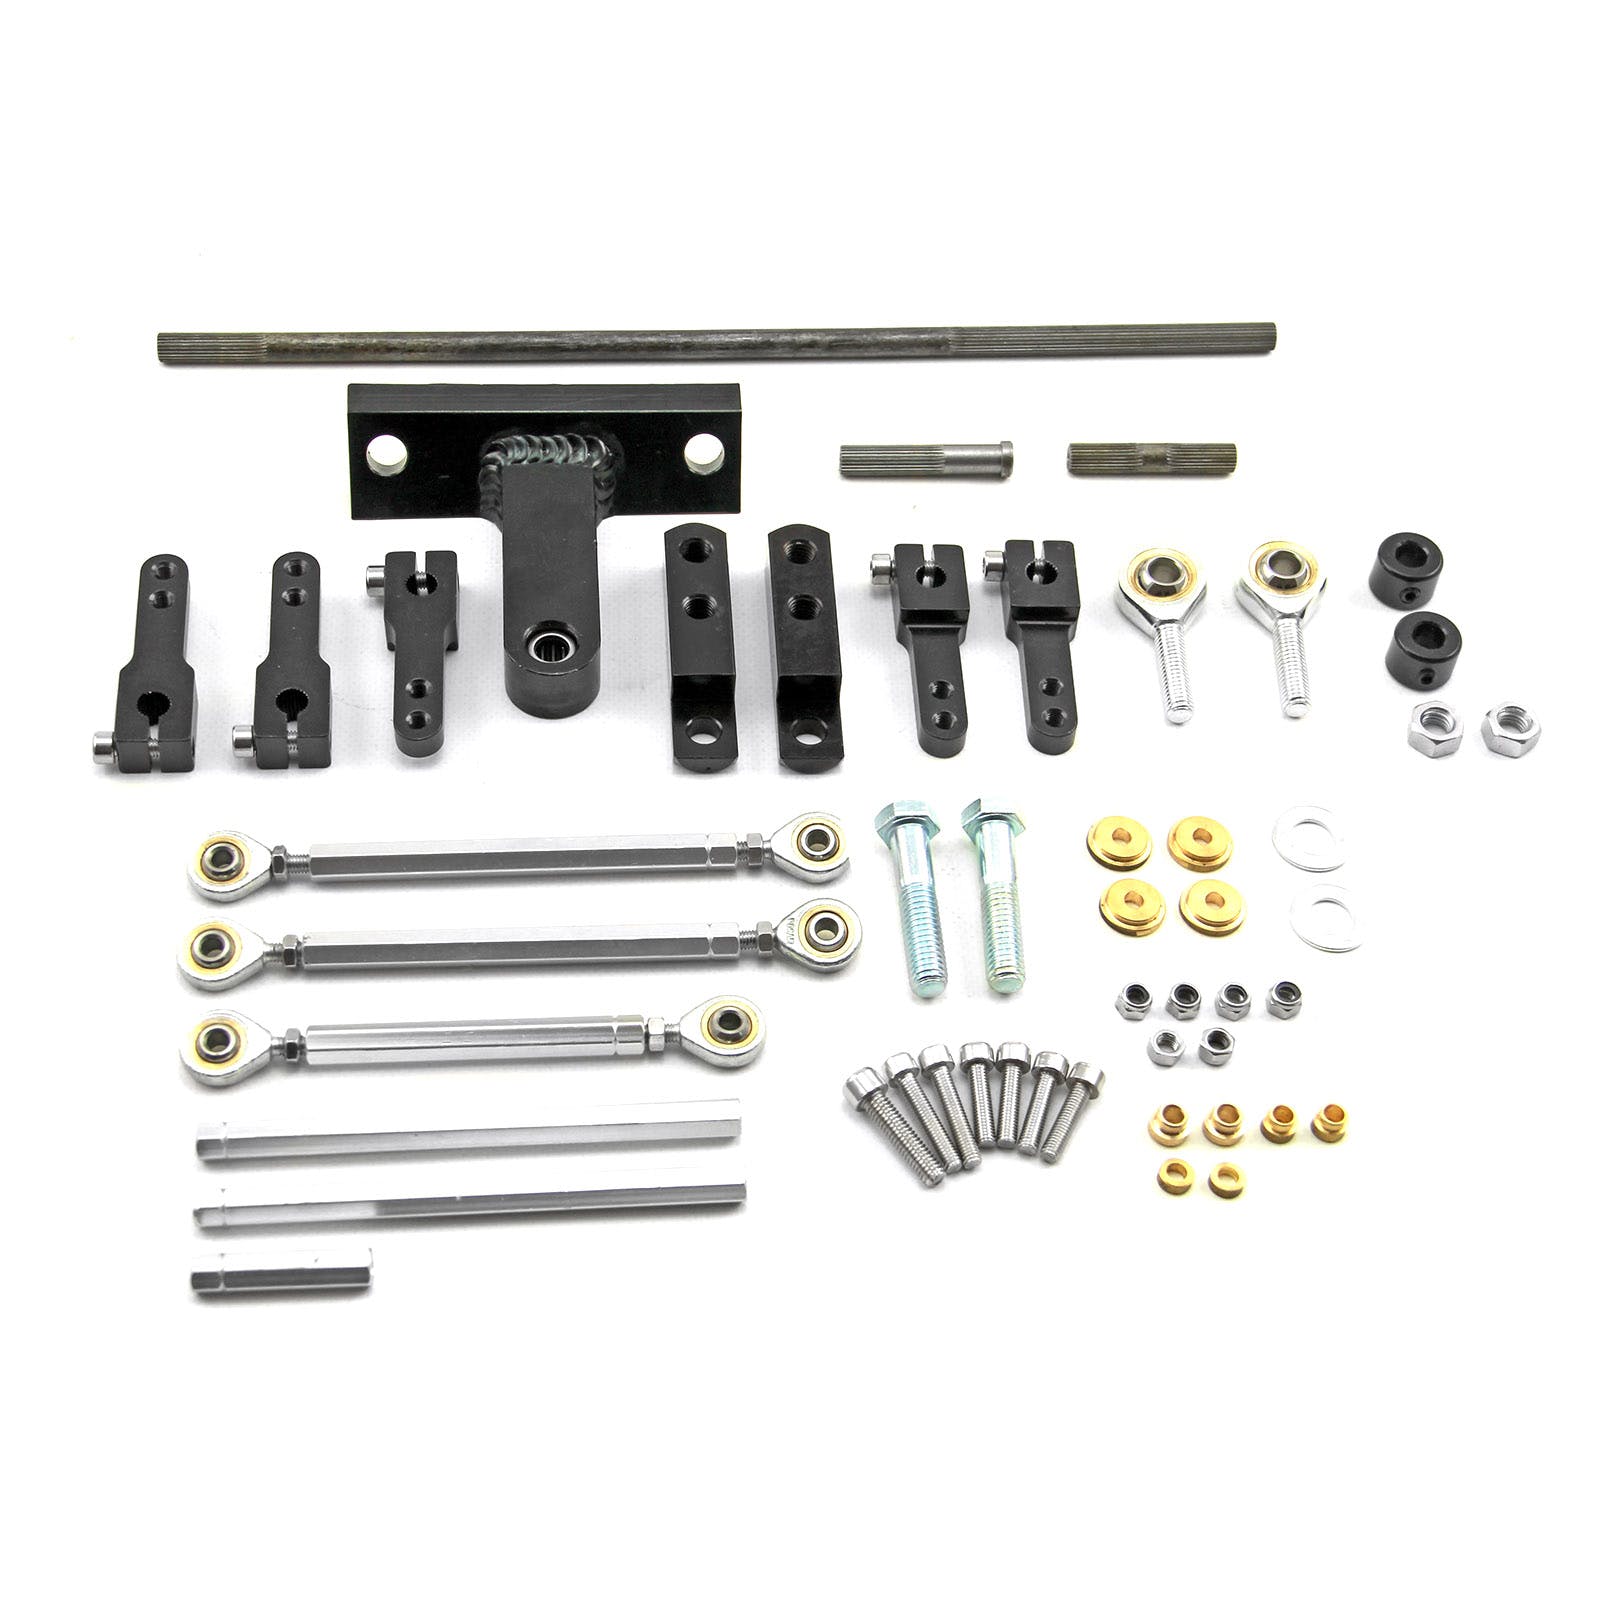 Speedmaster PCE476.1001 Dual Side Mount Carburetor Linkage Kit for Blower and Tunnel Ram Applications